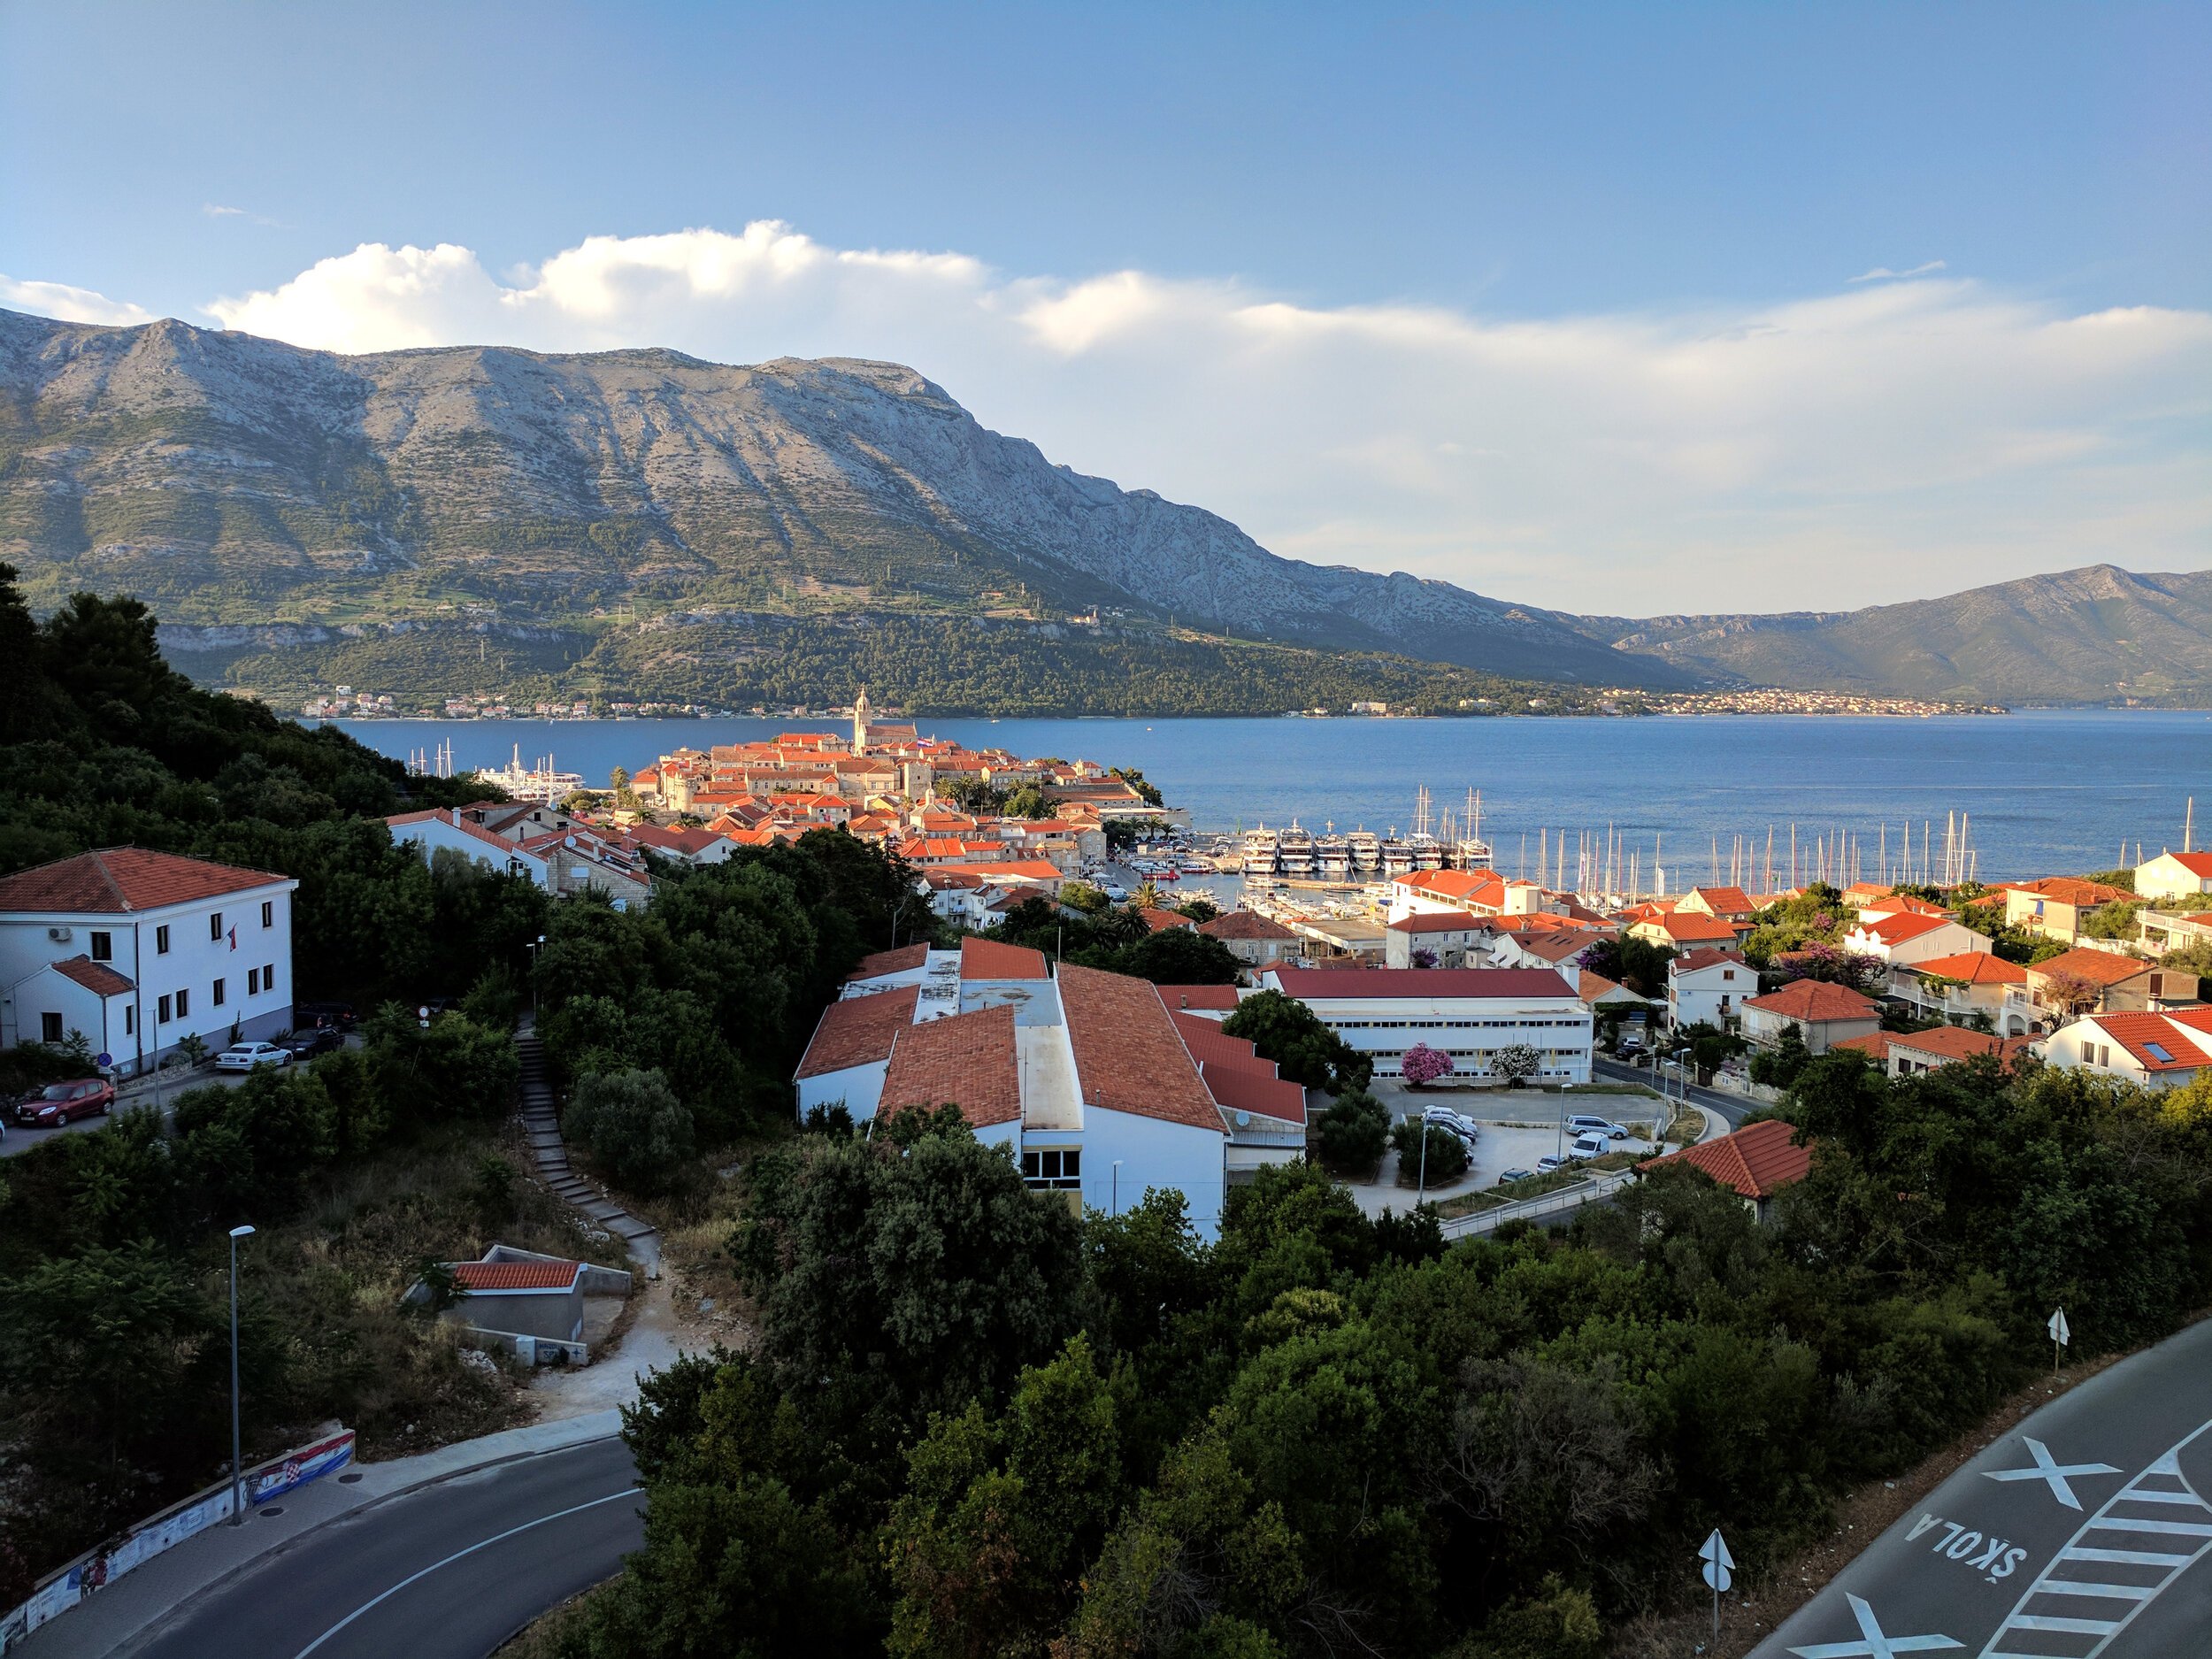 Korcula-Old-Town-and-Mountains.jpg